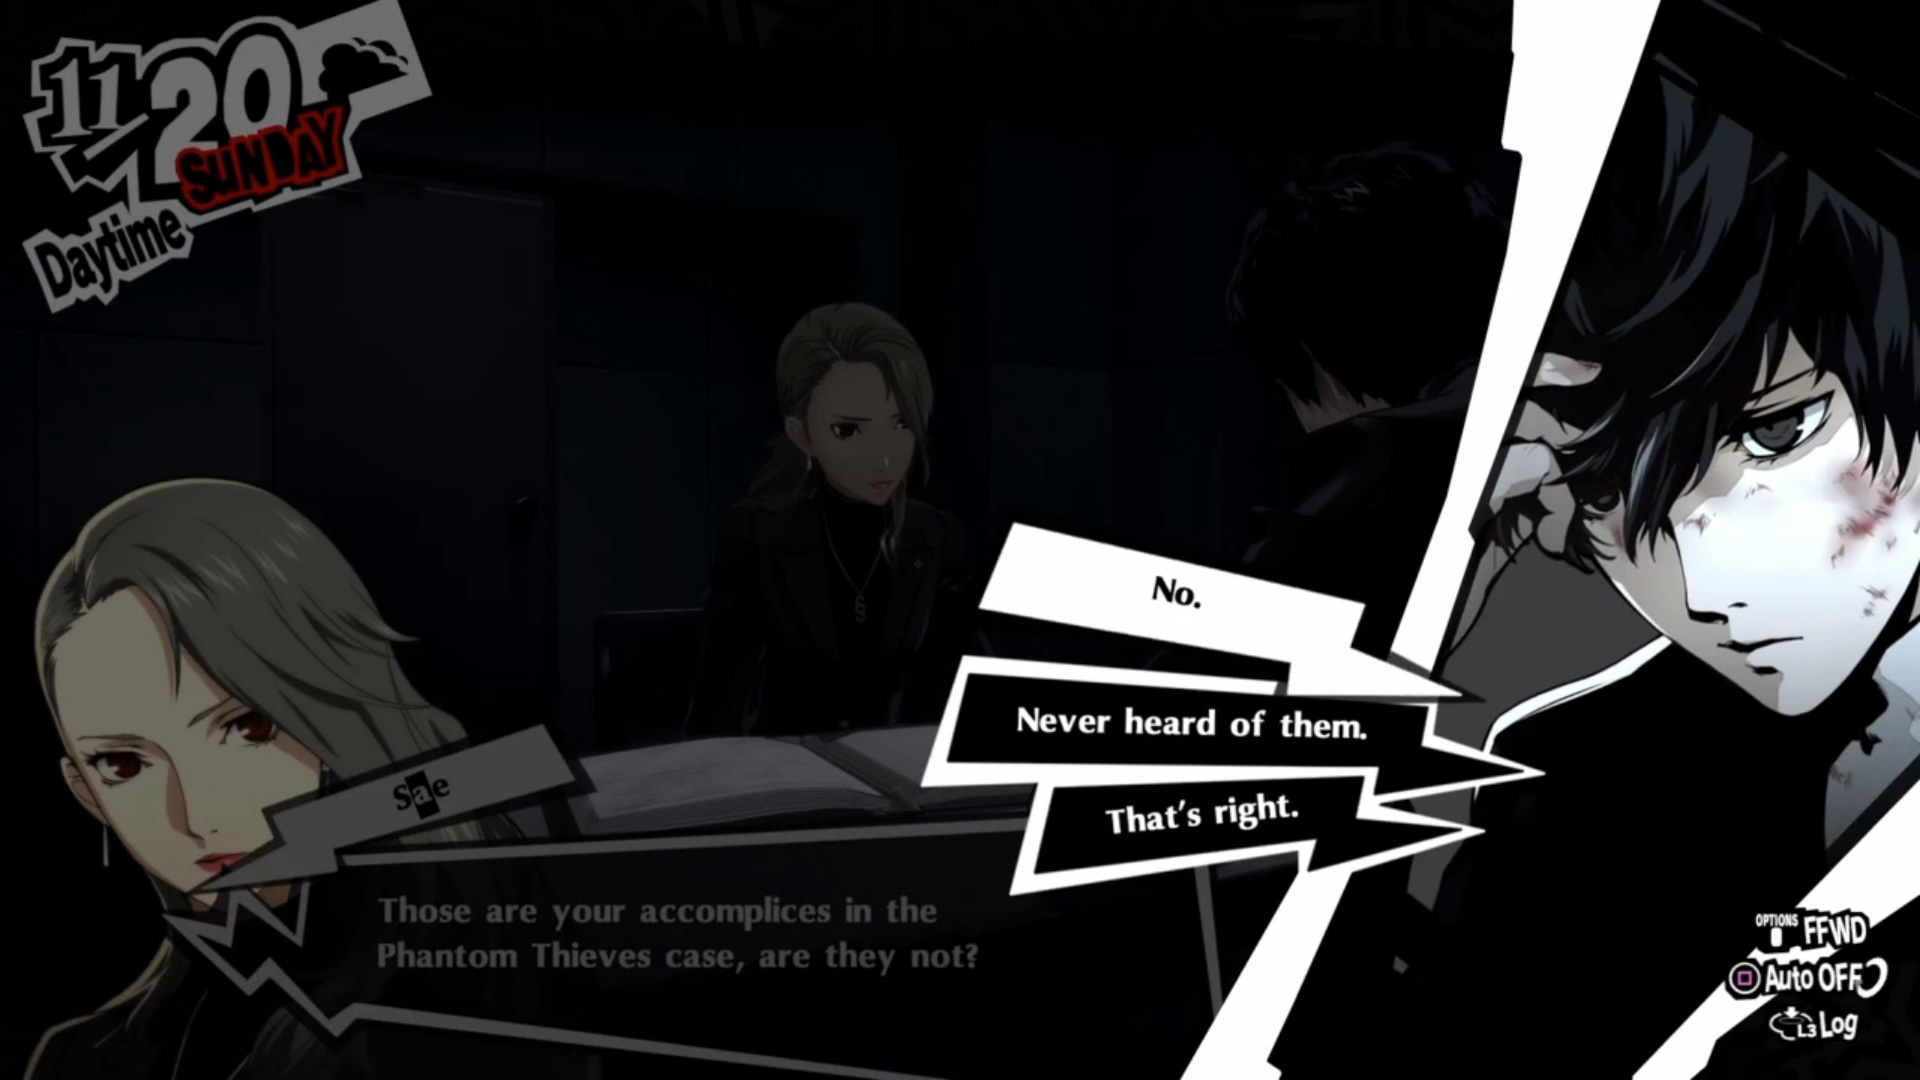 Those are your accomplices persona 5